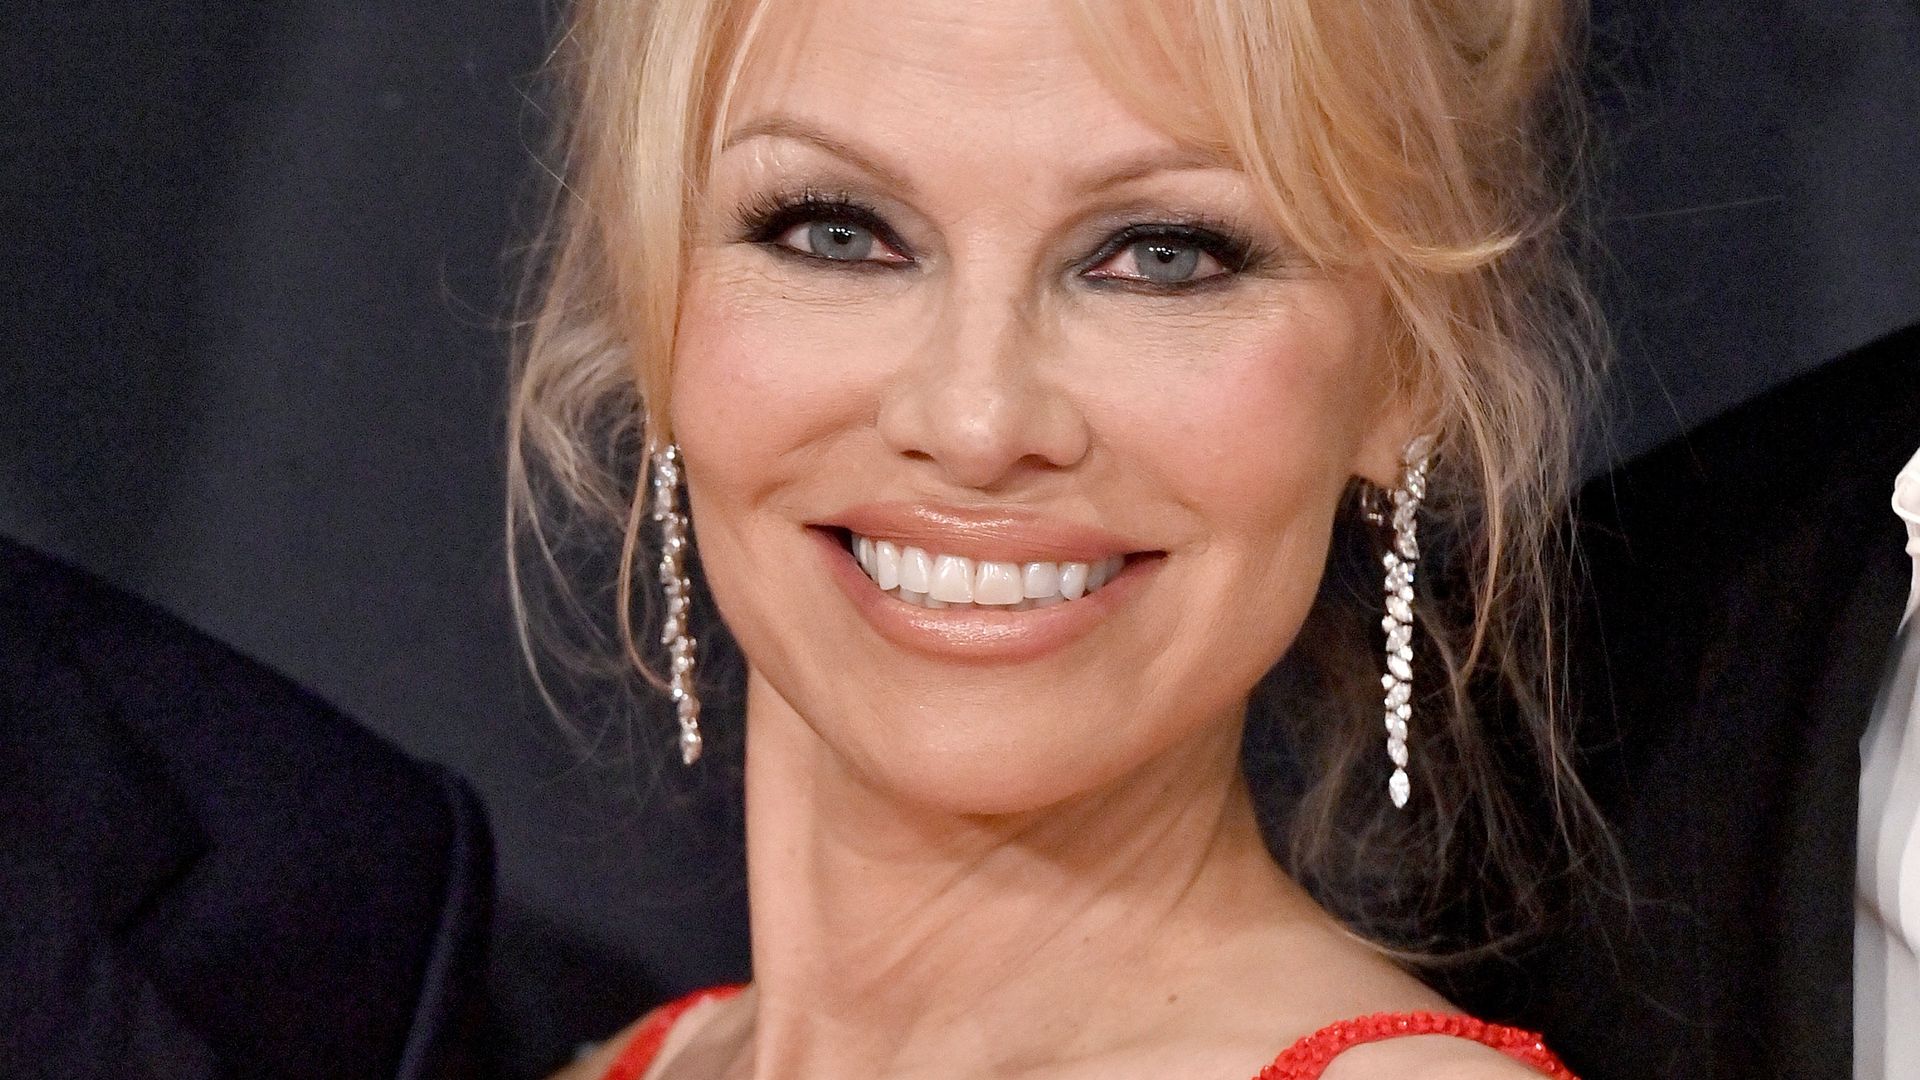 Pamela Anderson wows in red dress